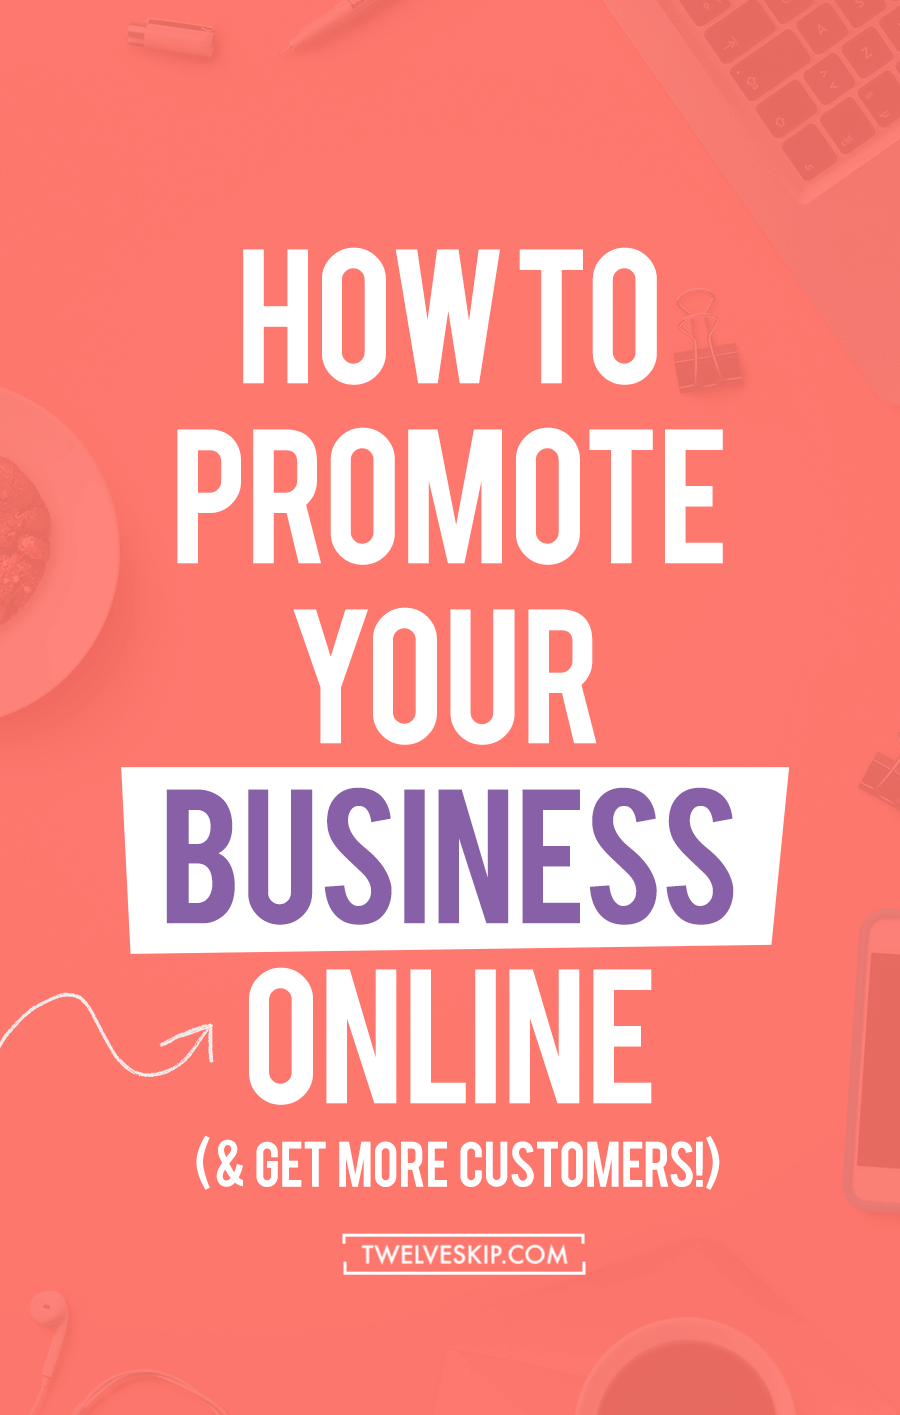 5 Effective Marketing Techniques To Promote Your Business Online & Get More Customers